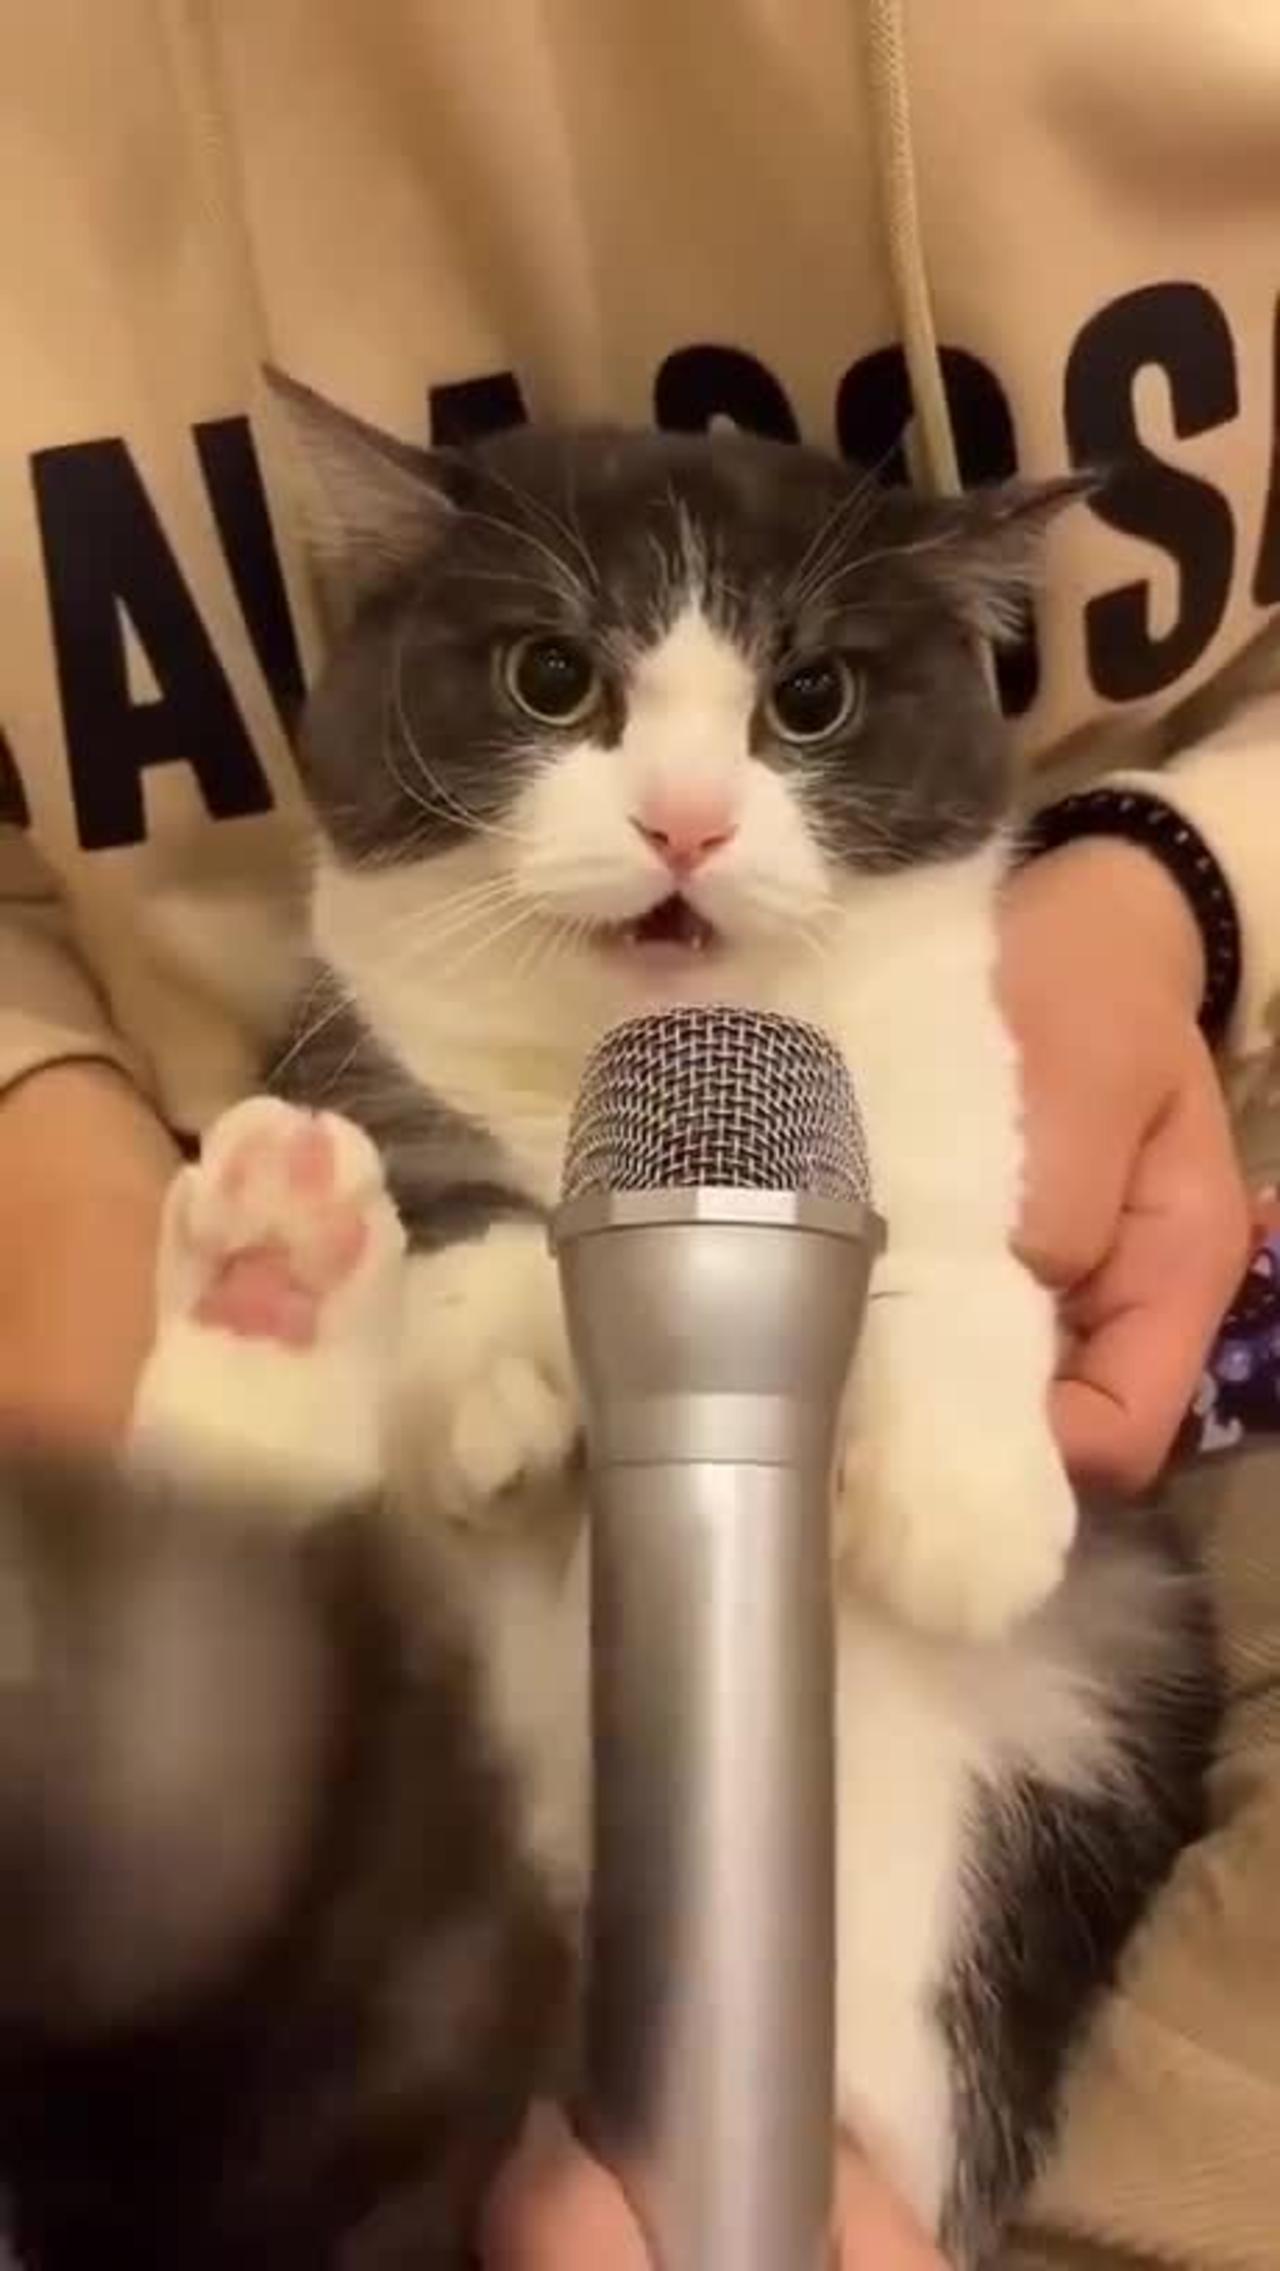 Funny videos, short videos, funny moments, funny cat singing, funny videos with cats